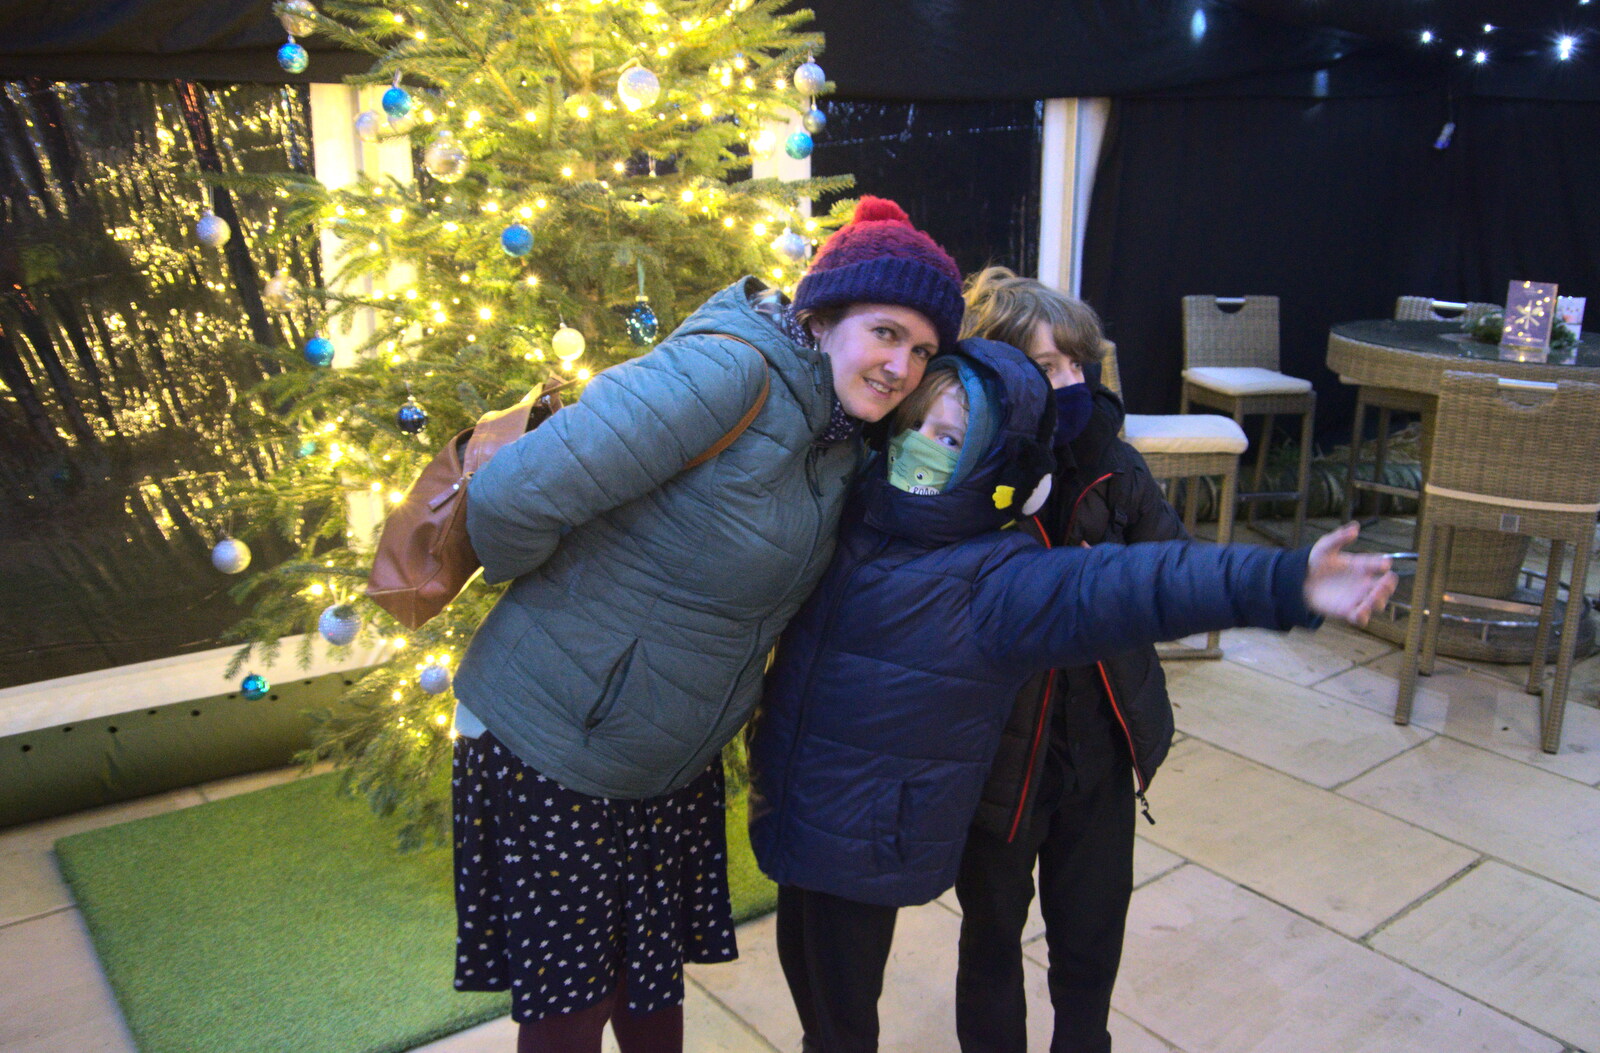 Isobel, Harry and Fred by the Christmas tree from A Return to the Oaksmere, Brome, Suffolk - 8th December 2020